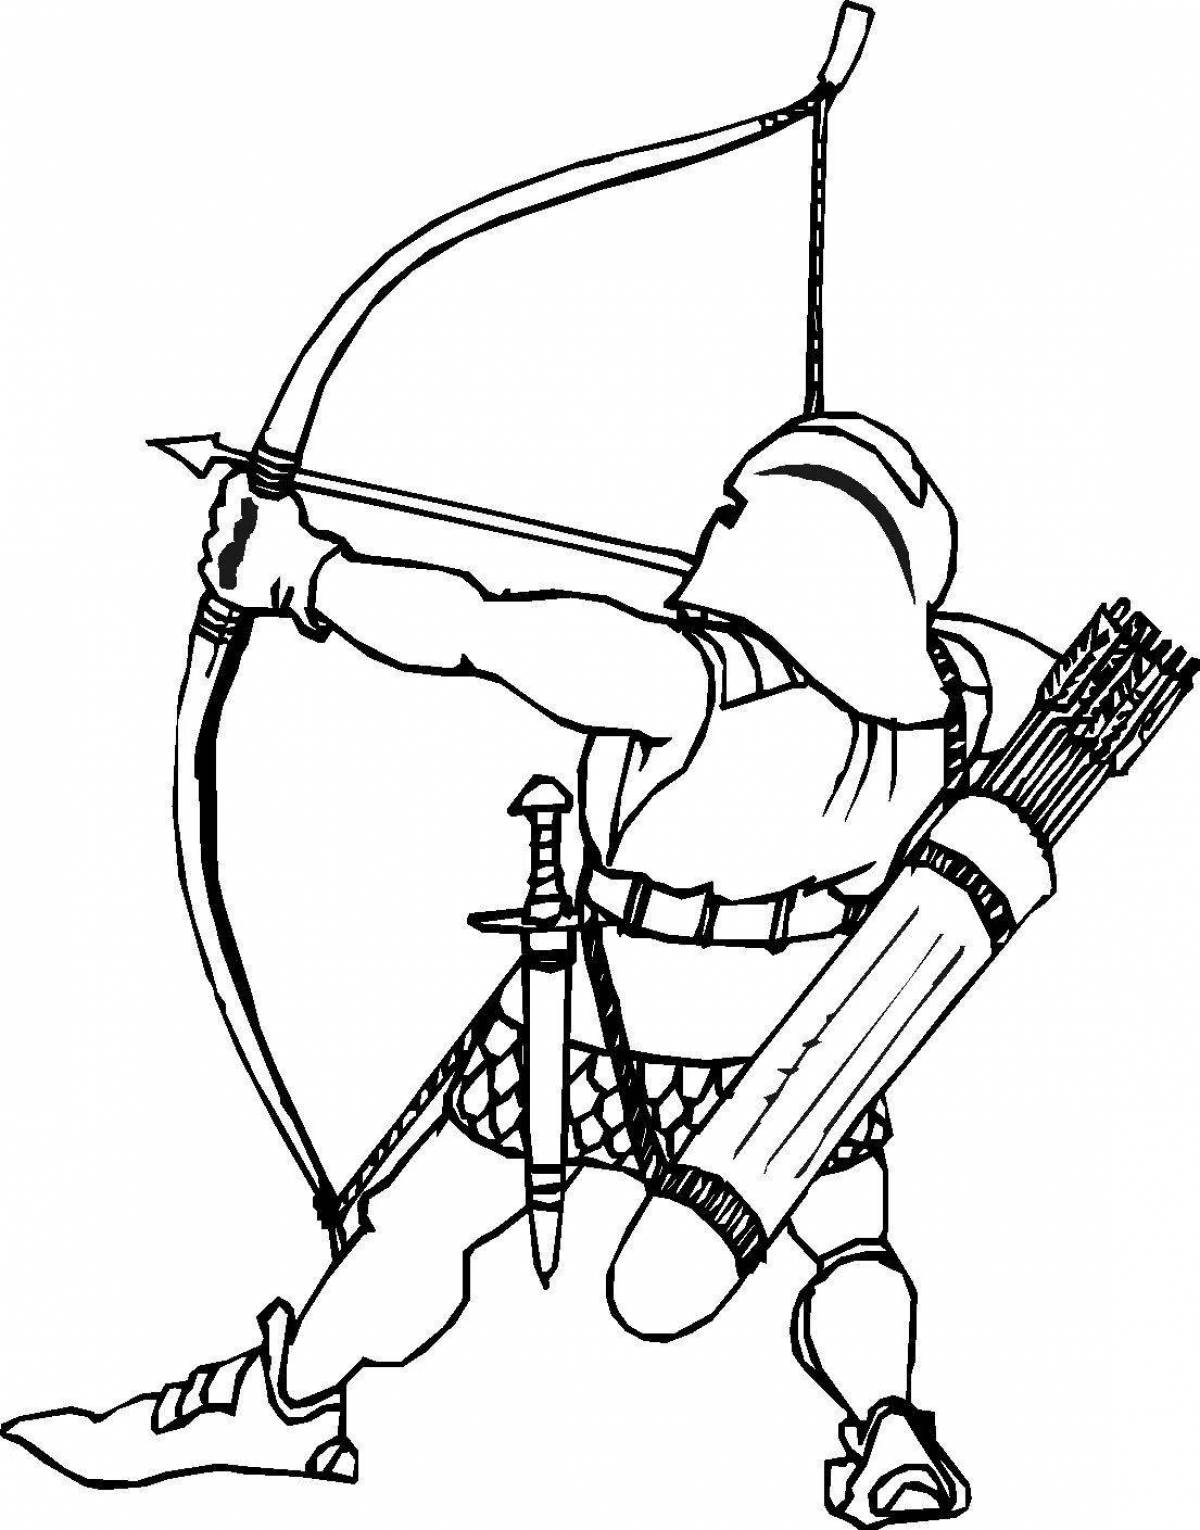 Archer coloring page